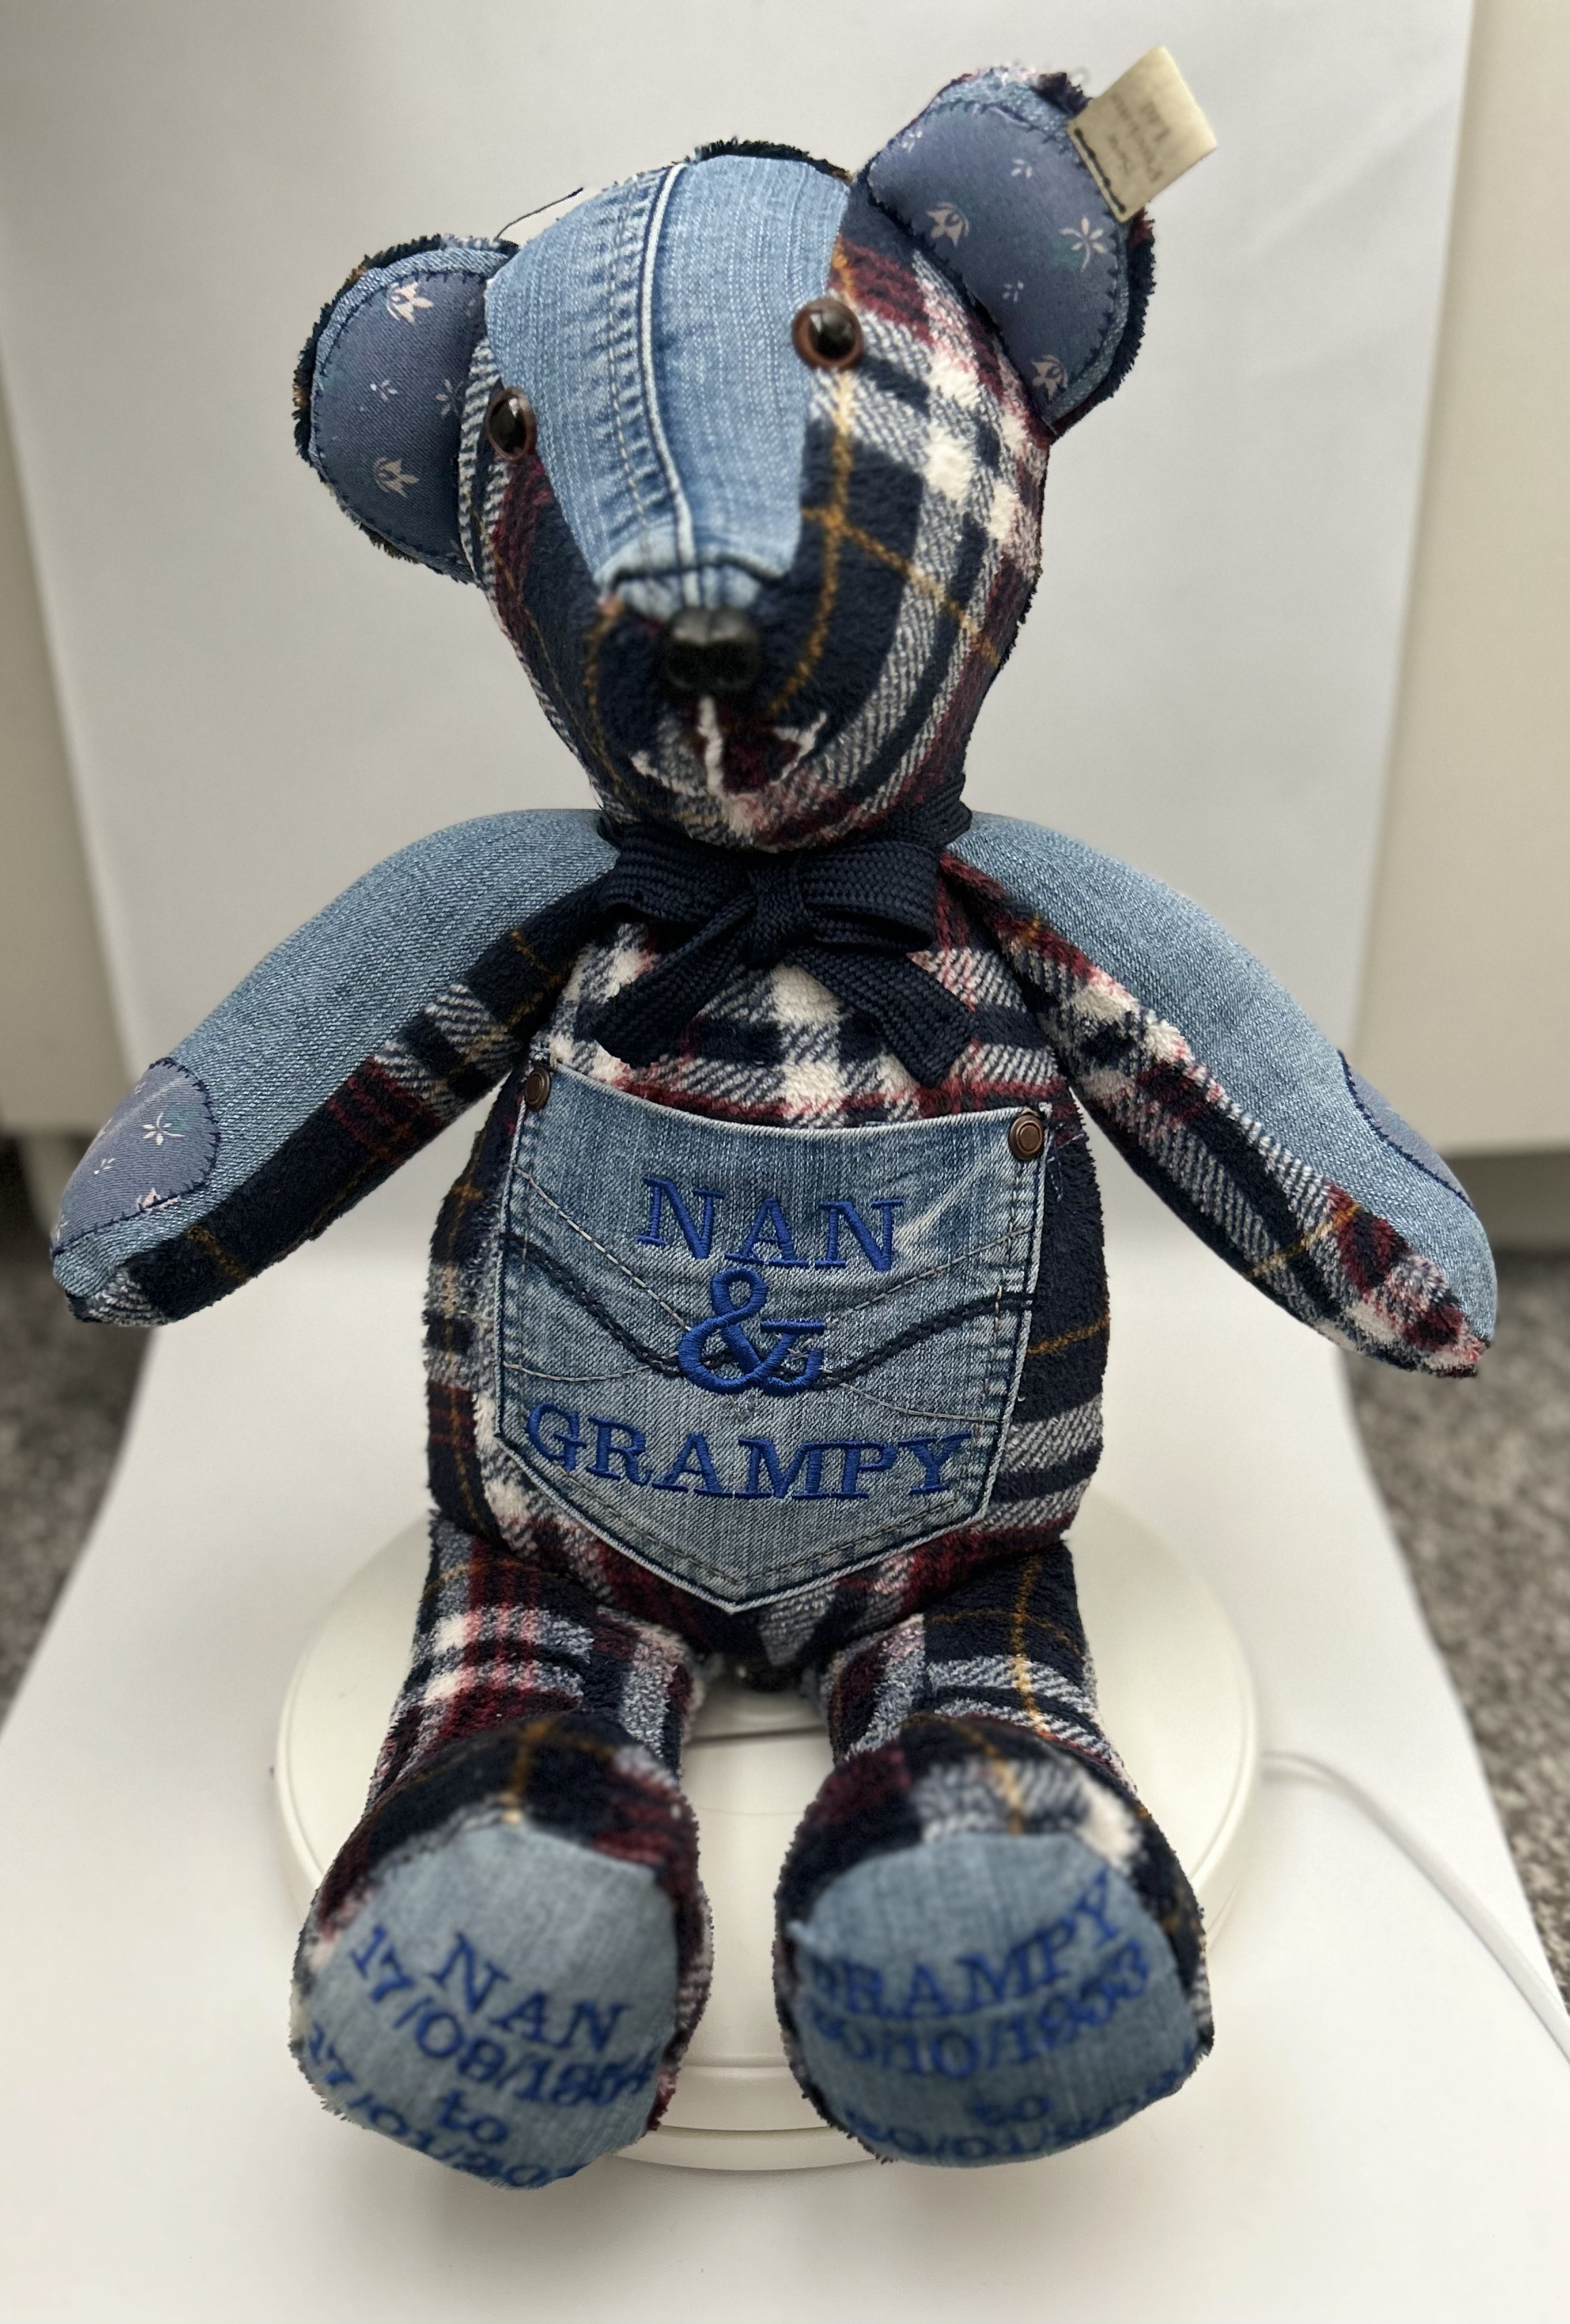 A patchwork bear reading 'Nan and Grampy' on the front